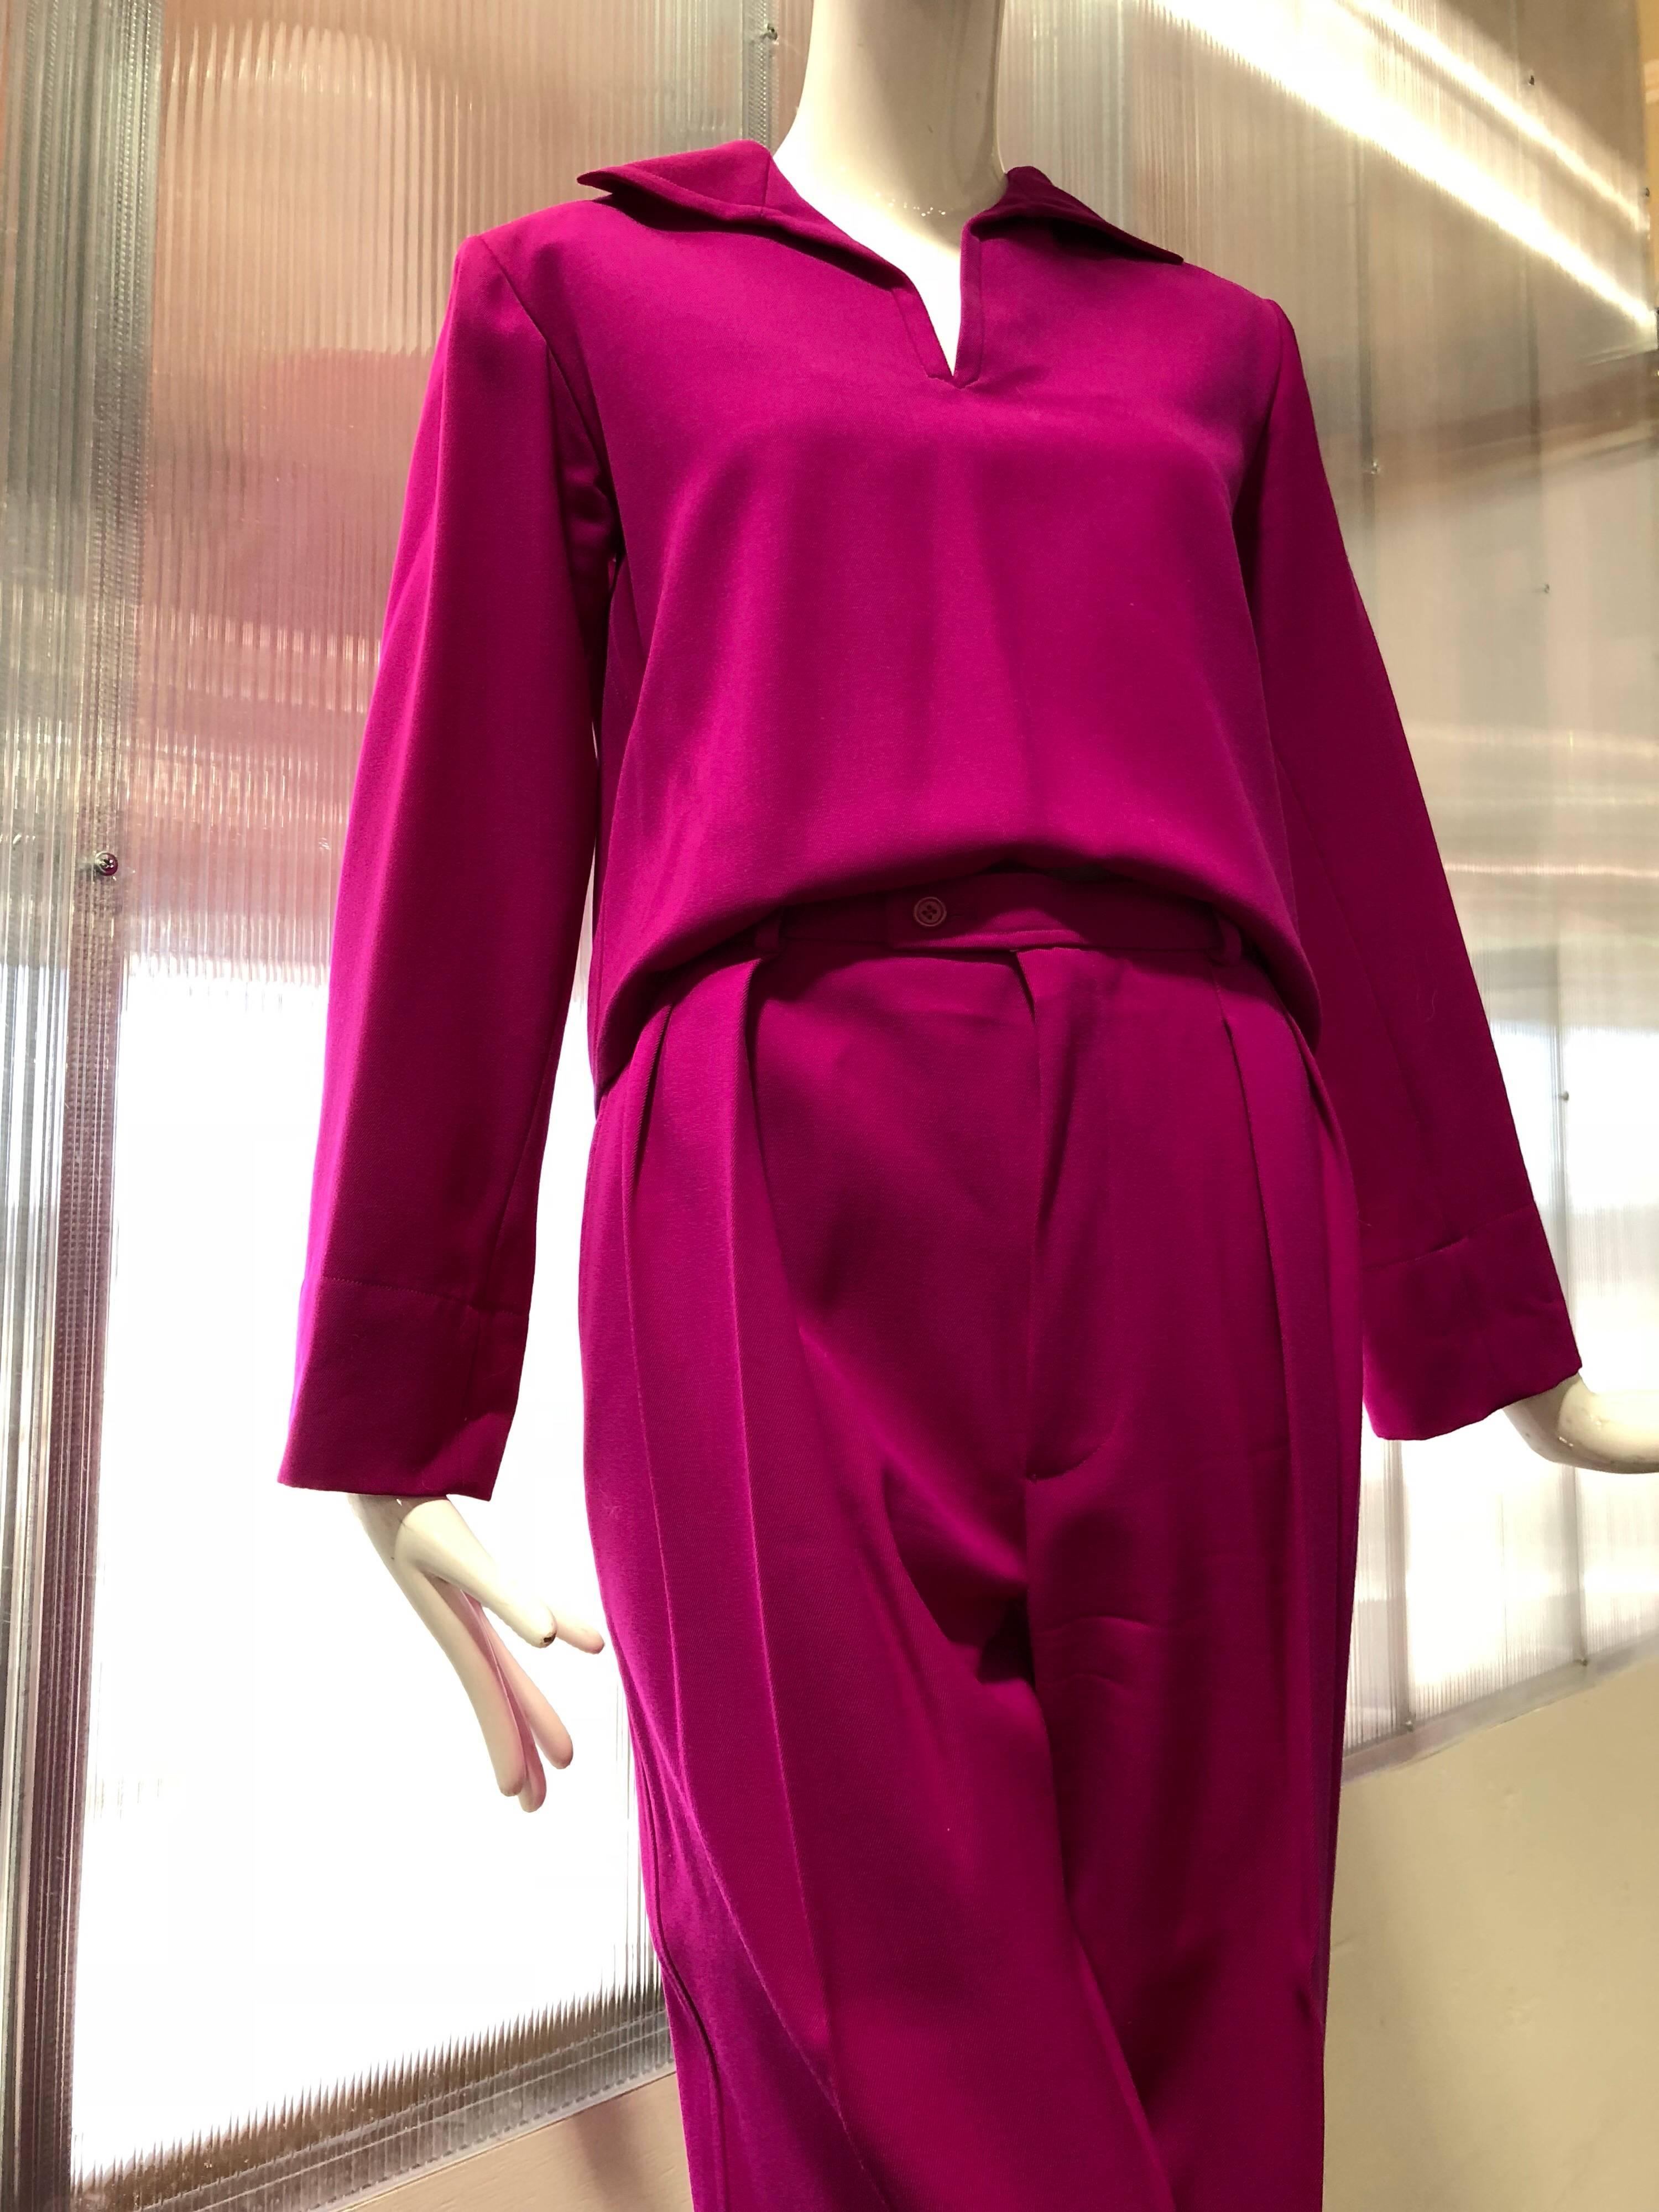 1980s Yves Saint Laurent hot pink spring 2-piece pant ensemble: Wool gabardine pant and sailor-style top.  Pants are pleated at hip with full straight leg and side slit pockets. Sailor top slides over head with no closures.  Side slits. Slightly